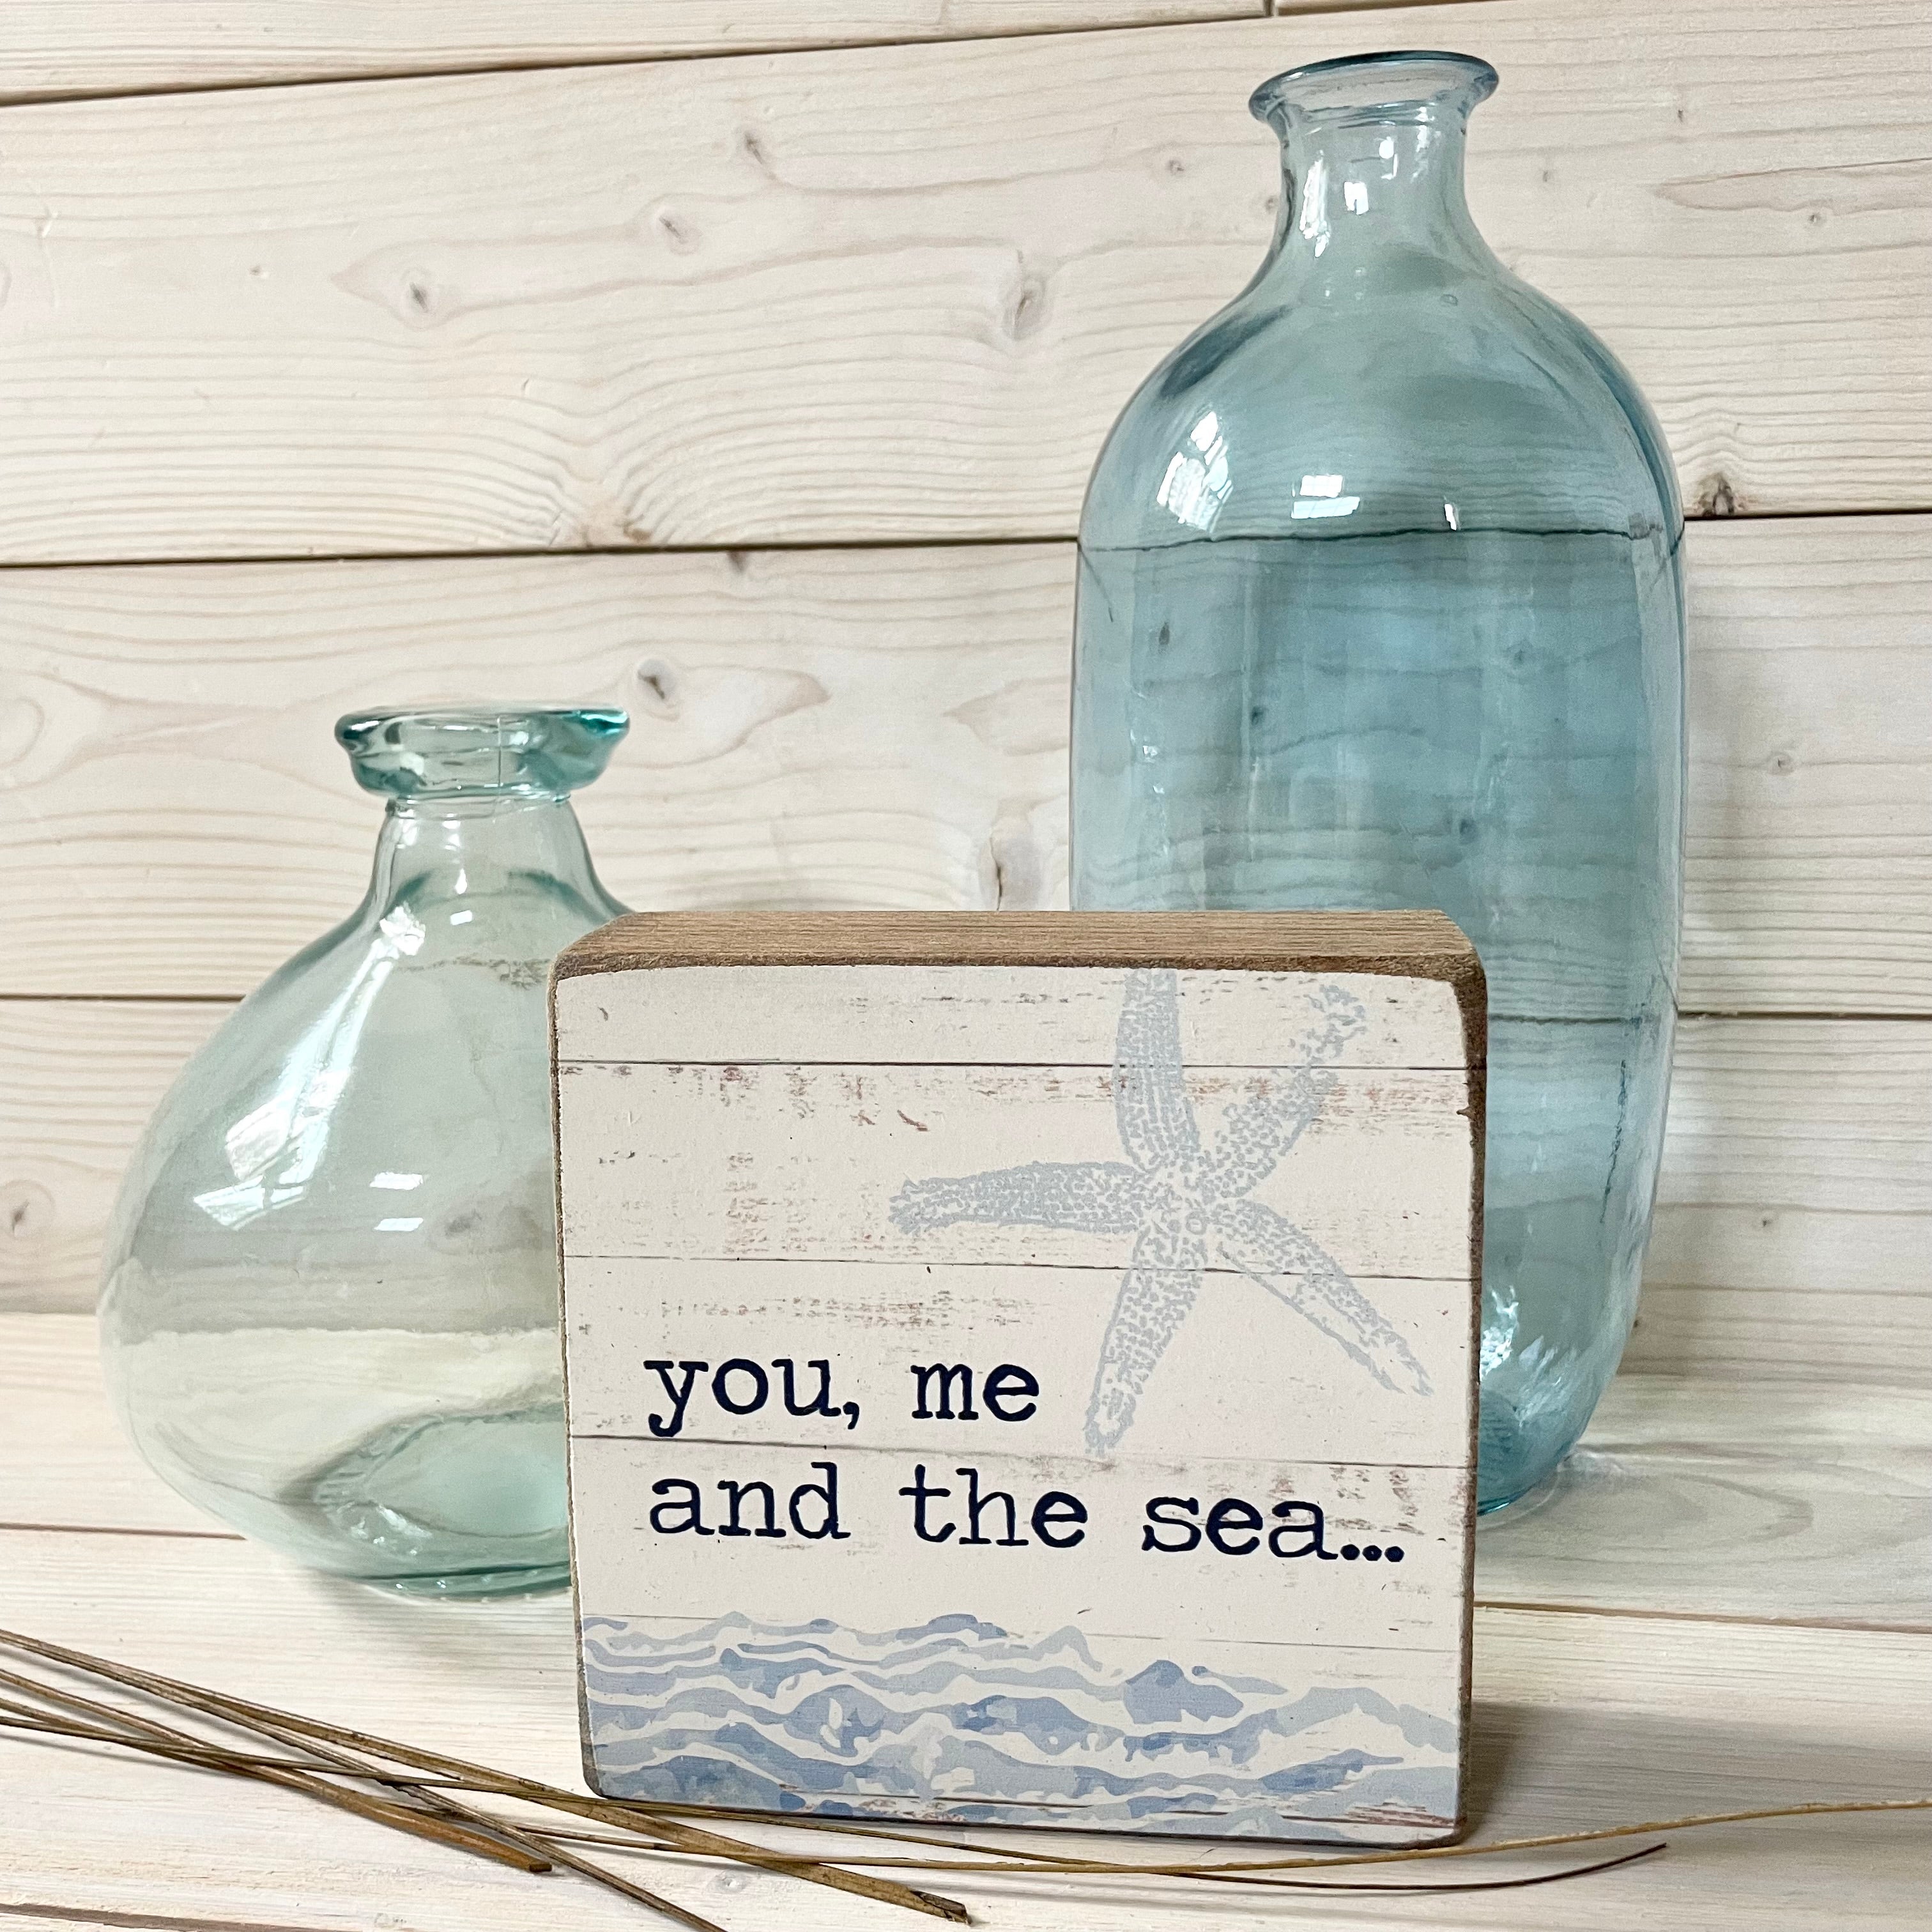 You, Me and the Sea Decorative Wooden Block